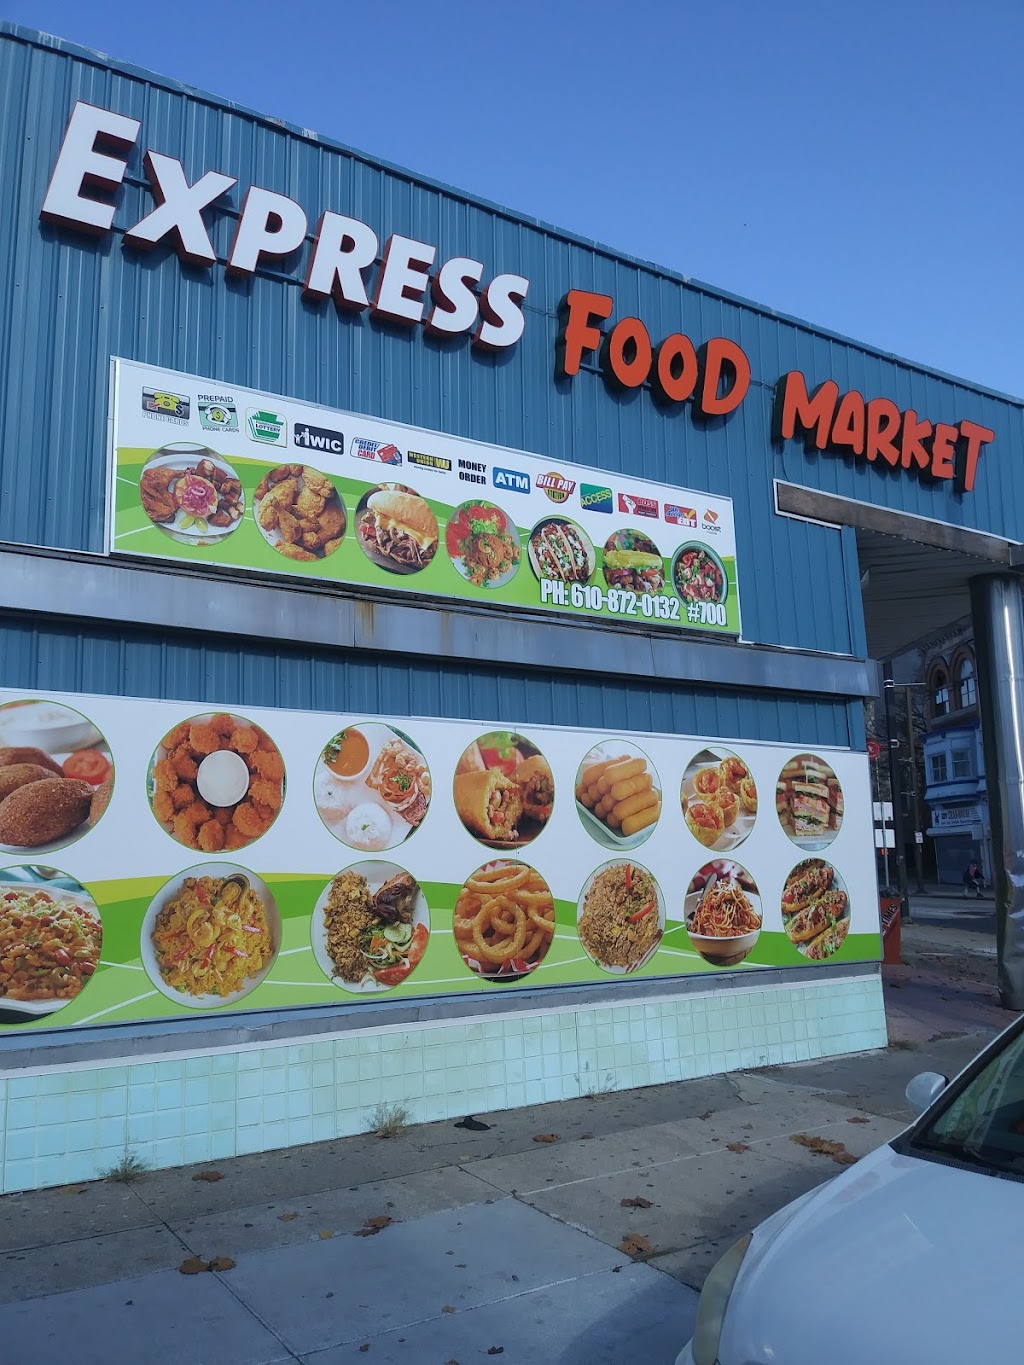 Express Food Market | 700 Avenue of the States, Chester, PA 19013 | Phone: (610) 872-0132